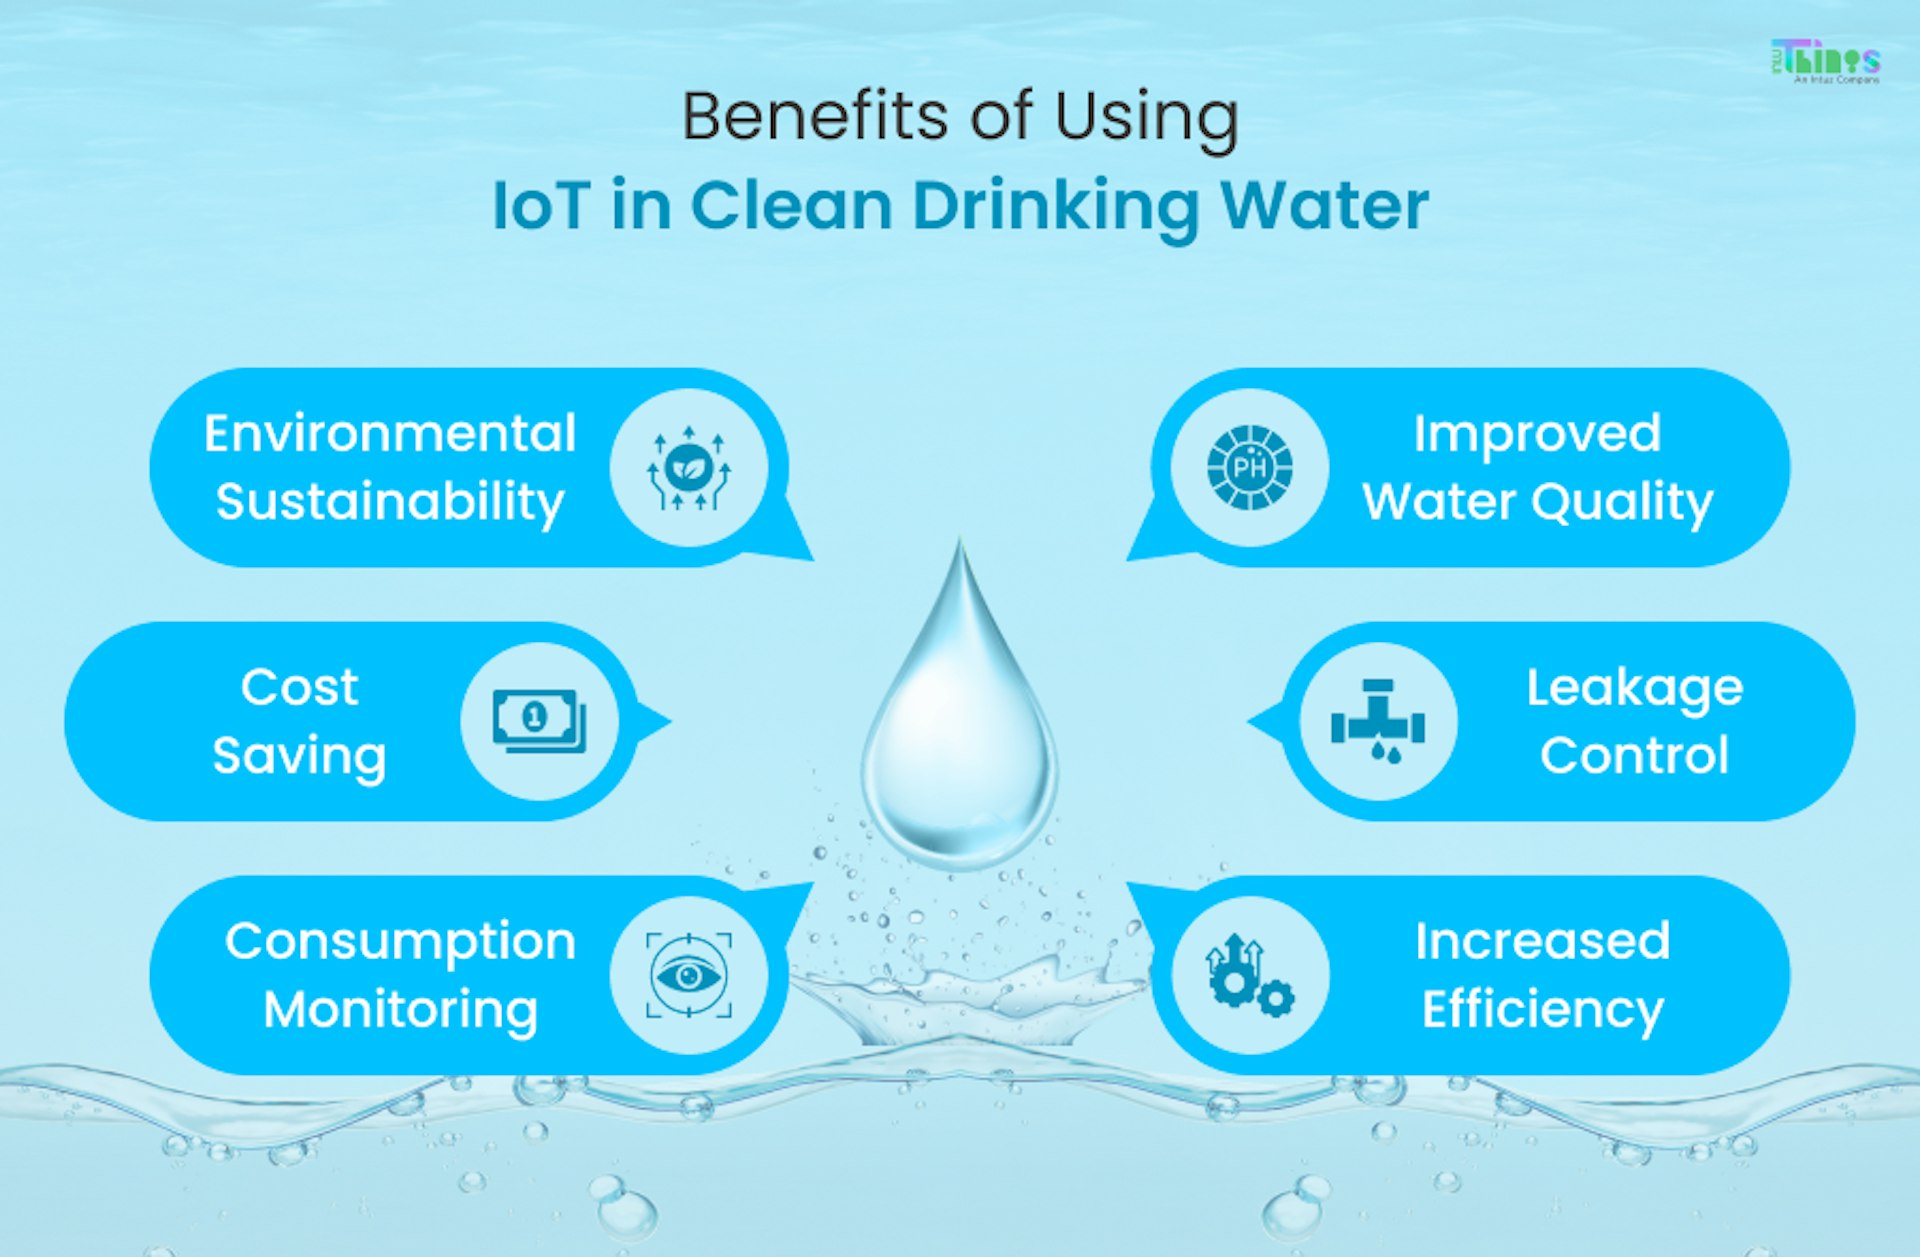 Benefits of IoT in clean drinking water